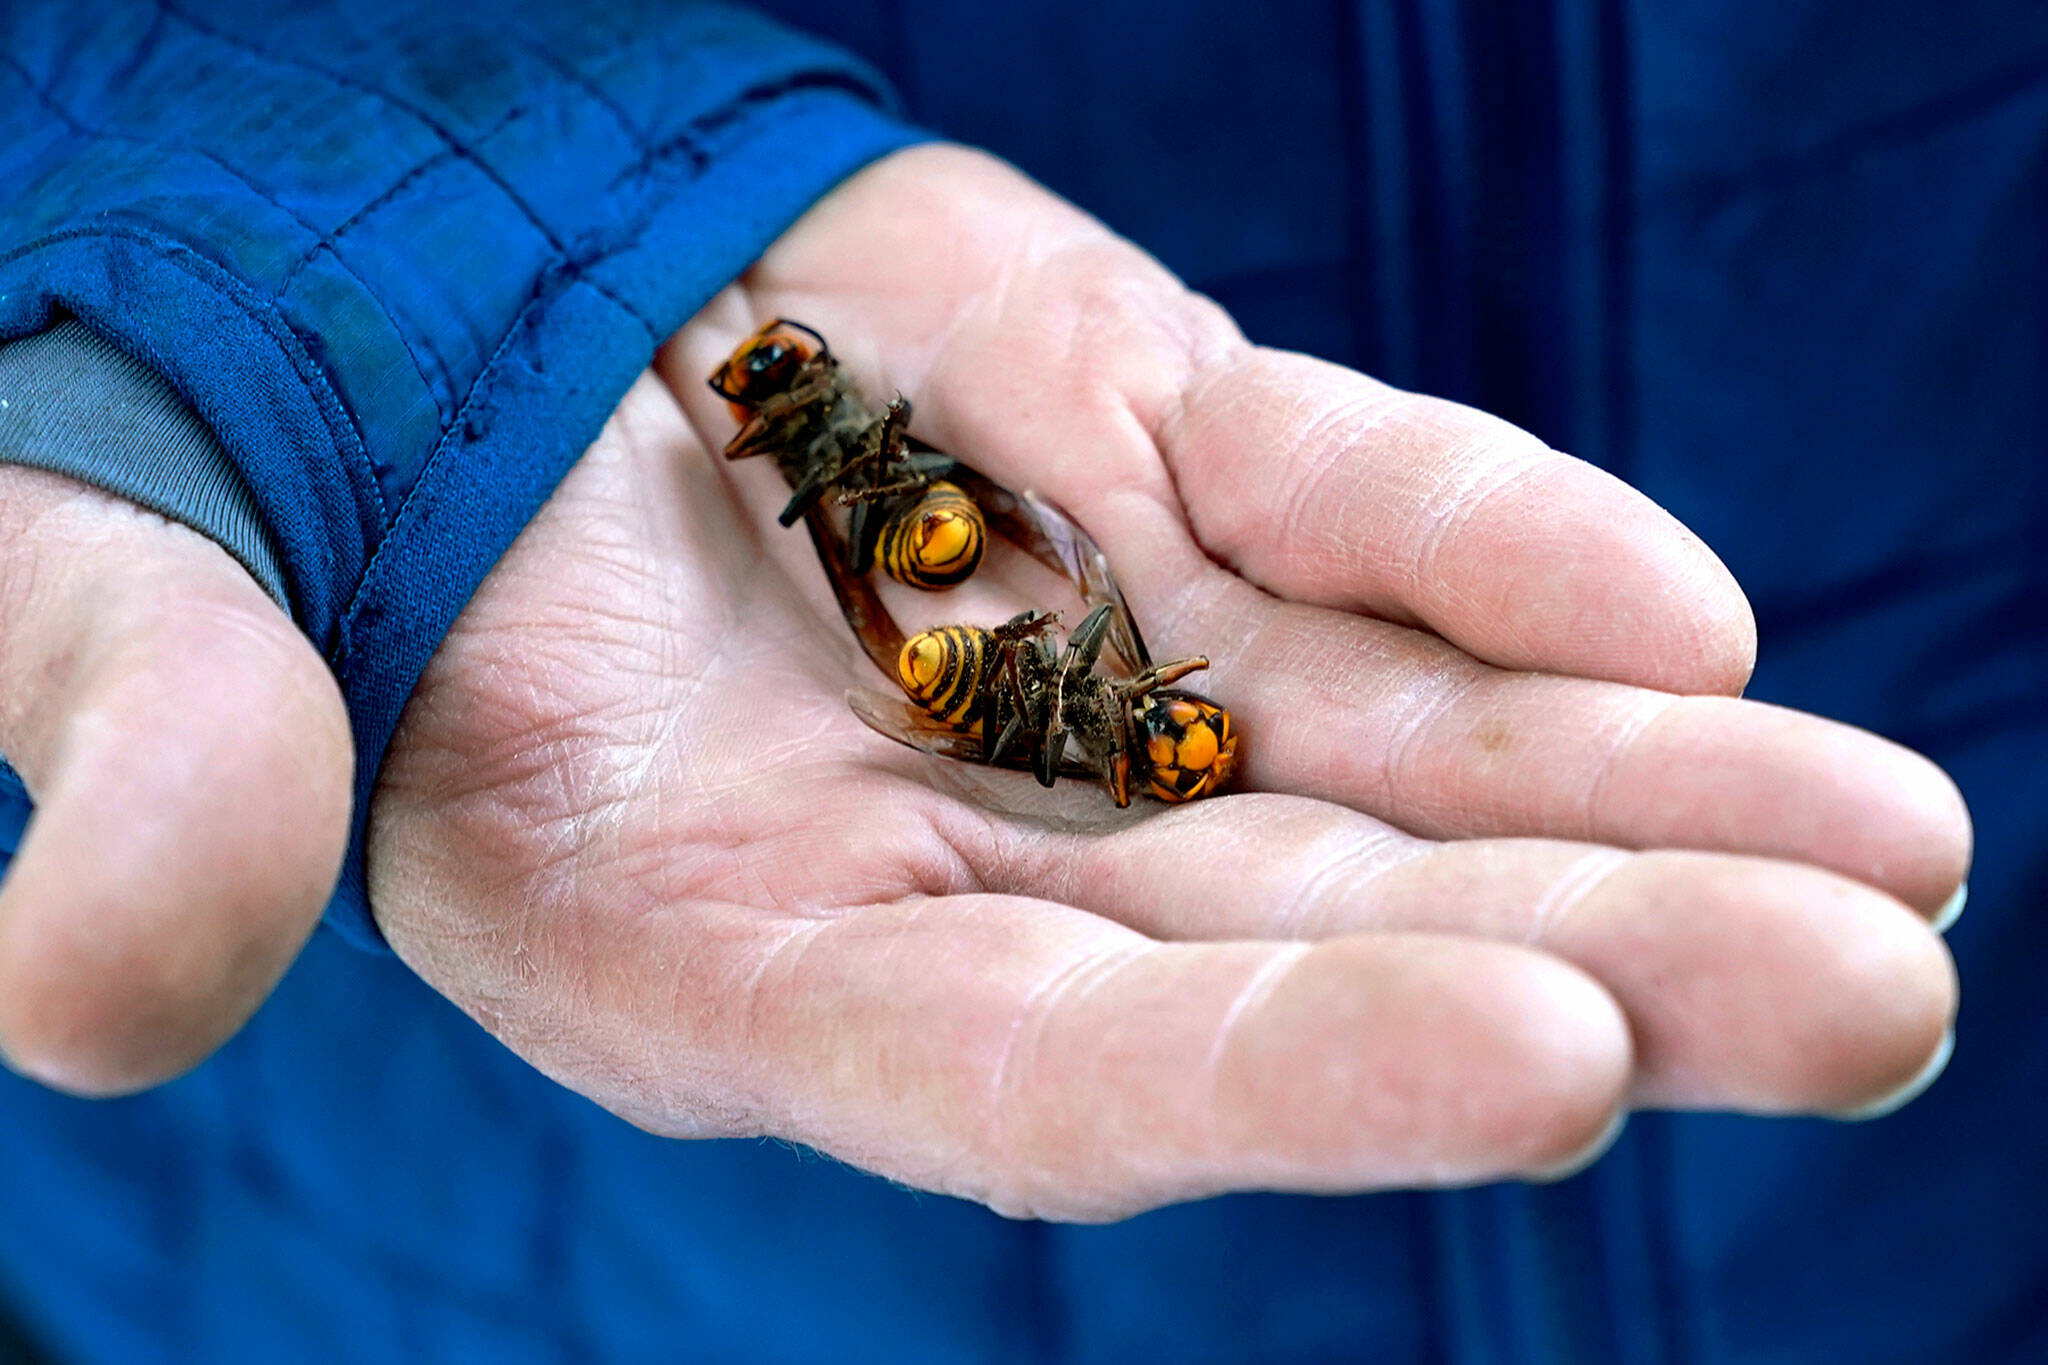 A Washington state Department of Agriculture worker on Oct. 24, 2020 holds two of the dozens of Asian giant hornets vacuumed from a tree in Blaine. (AP Photo / Elaine Thompson, File)